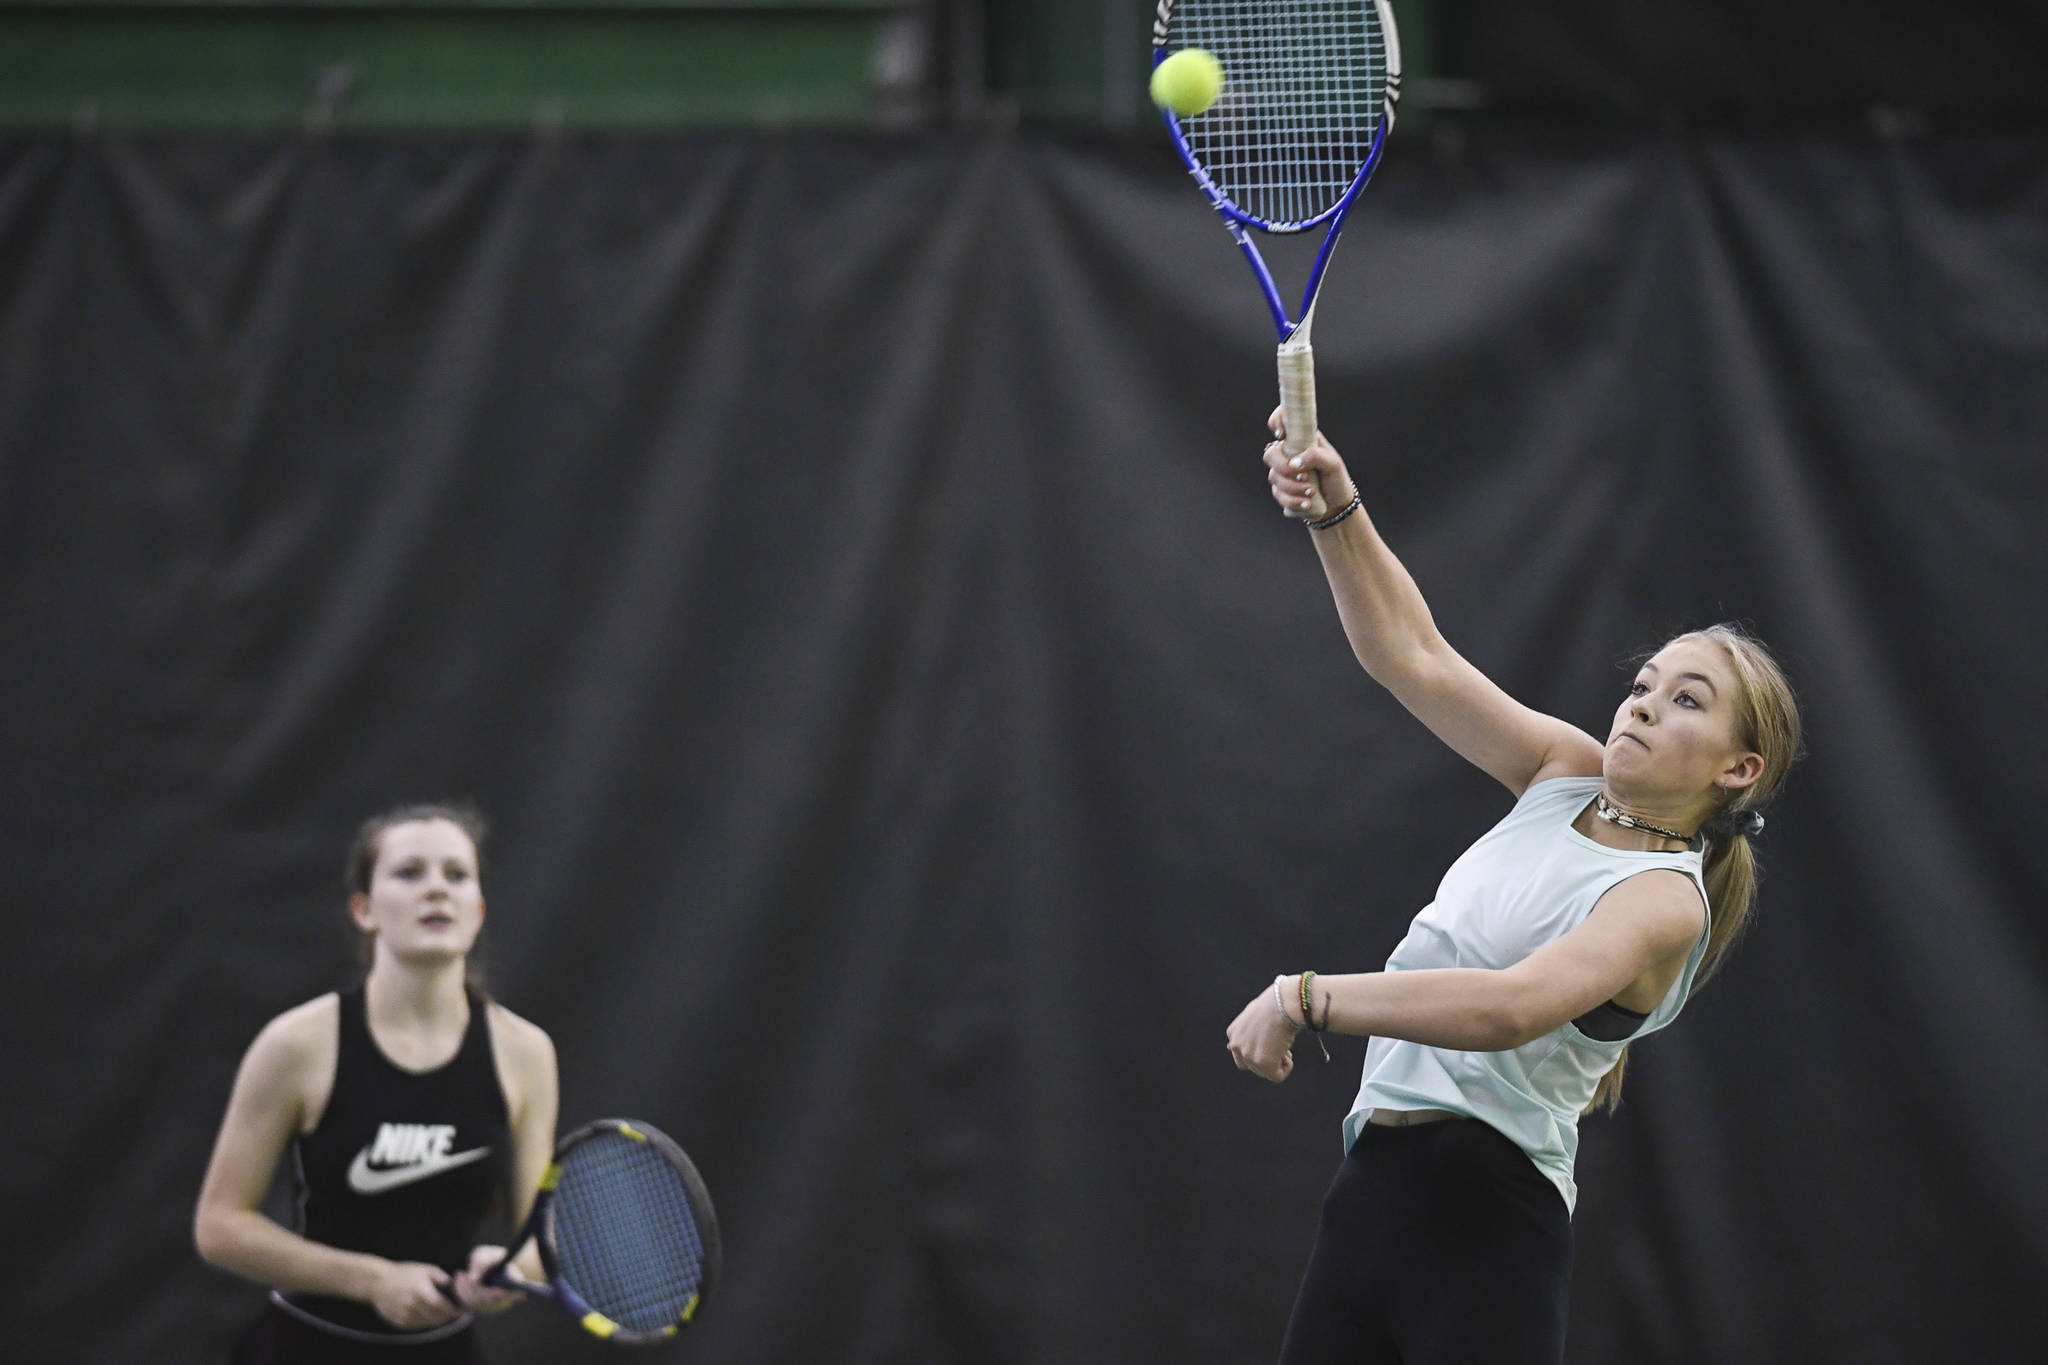 Jaymie Collman hits an overhead as she plays in the girls doubles’ final with partner Katie Pikul, background, against Adelie McMillan and Olivia Moore during the Region V Tennis Tournament at The Alaska Club/JRC on Saturday, Sept. 28, 2019. McMillan/Moore won 7-6, 6-4. (Michael Penn | Juneau Empire)